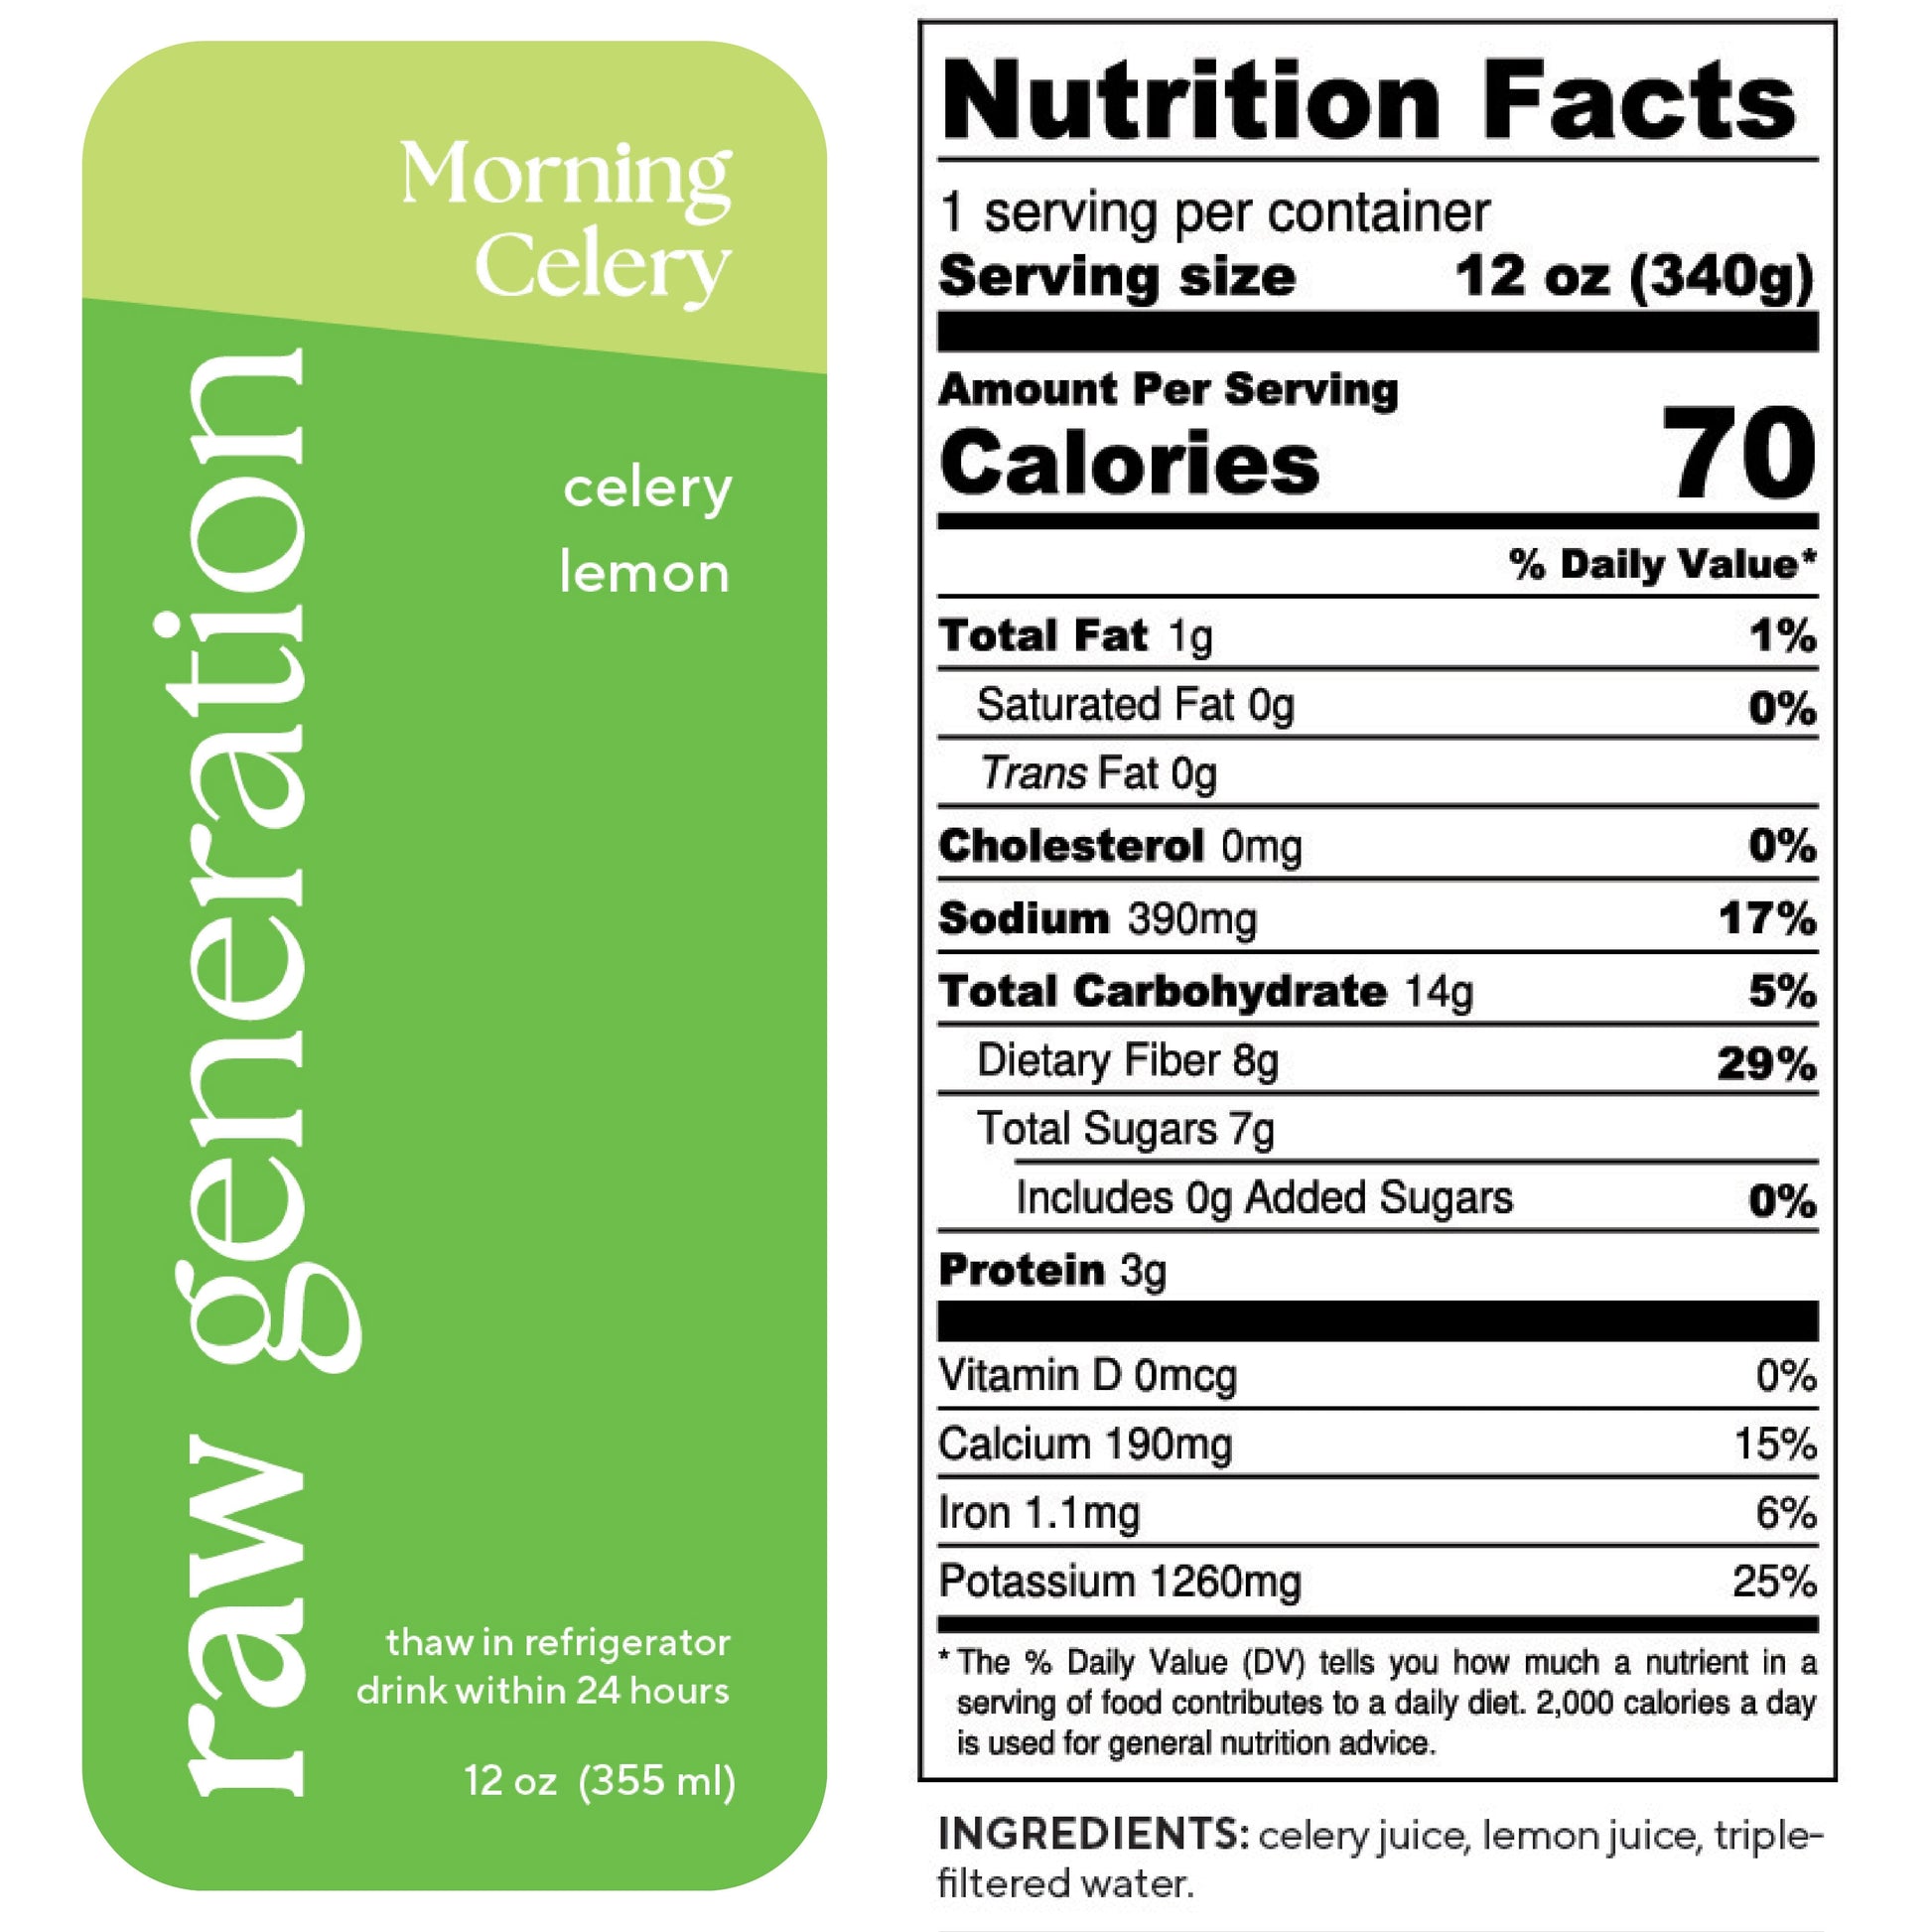 Nutrition Facts, 1 serving/container, 12 oz (340g), Calories 70, Total Fat 0g, Saturated Fat 0g, Trans Fat 0g, Cholesterol 0mg, Sodium 390mg, Total Carbohydrate 14g, Dietary Fiber 8g, Total Sugars 7g, Added Sugars 0g, Protein 3g, Vitamin D 0mcg, Calcium 190mg, Iron 1.1mg, Potassium 1260mg; Ingredients: celery juice, lemon juice, triple-filtered water.